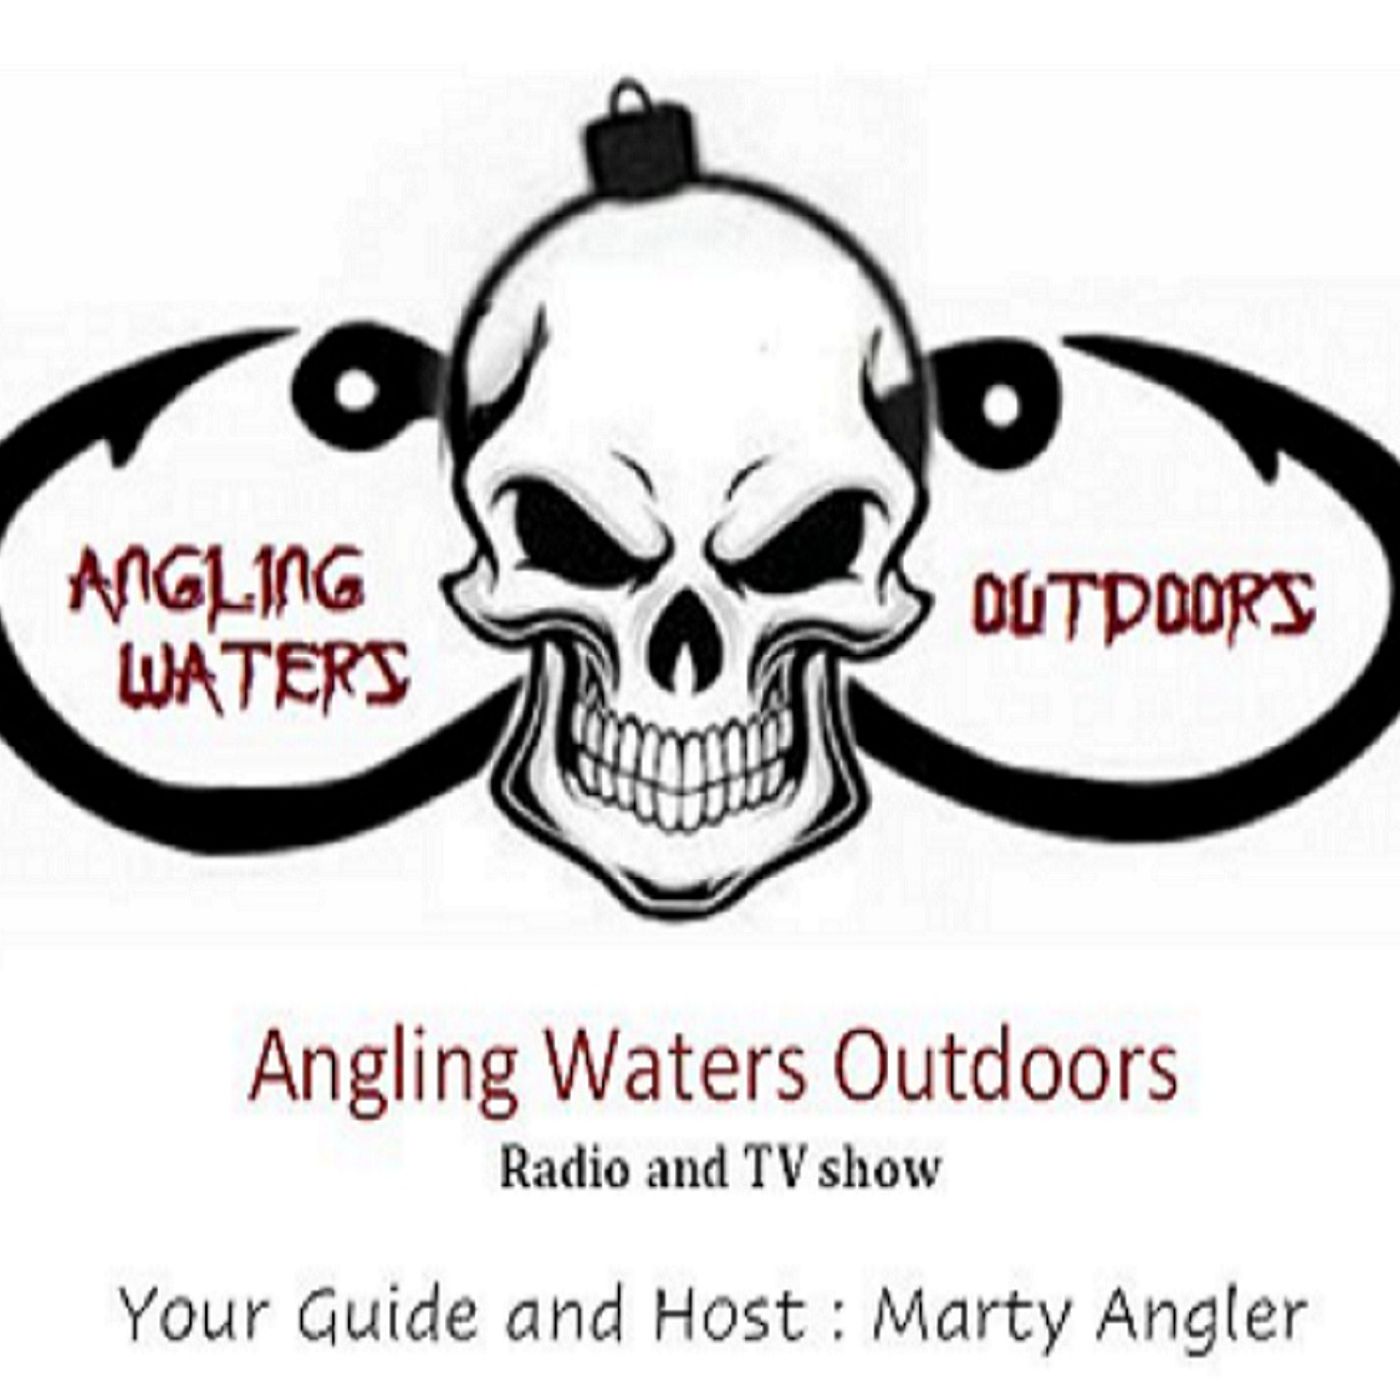 Angling Waters Outdoors show 7/18/2020 WHIW 101.3fM